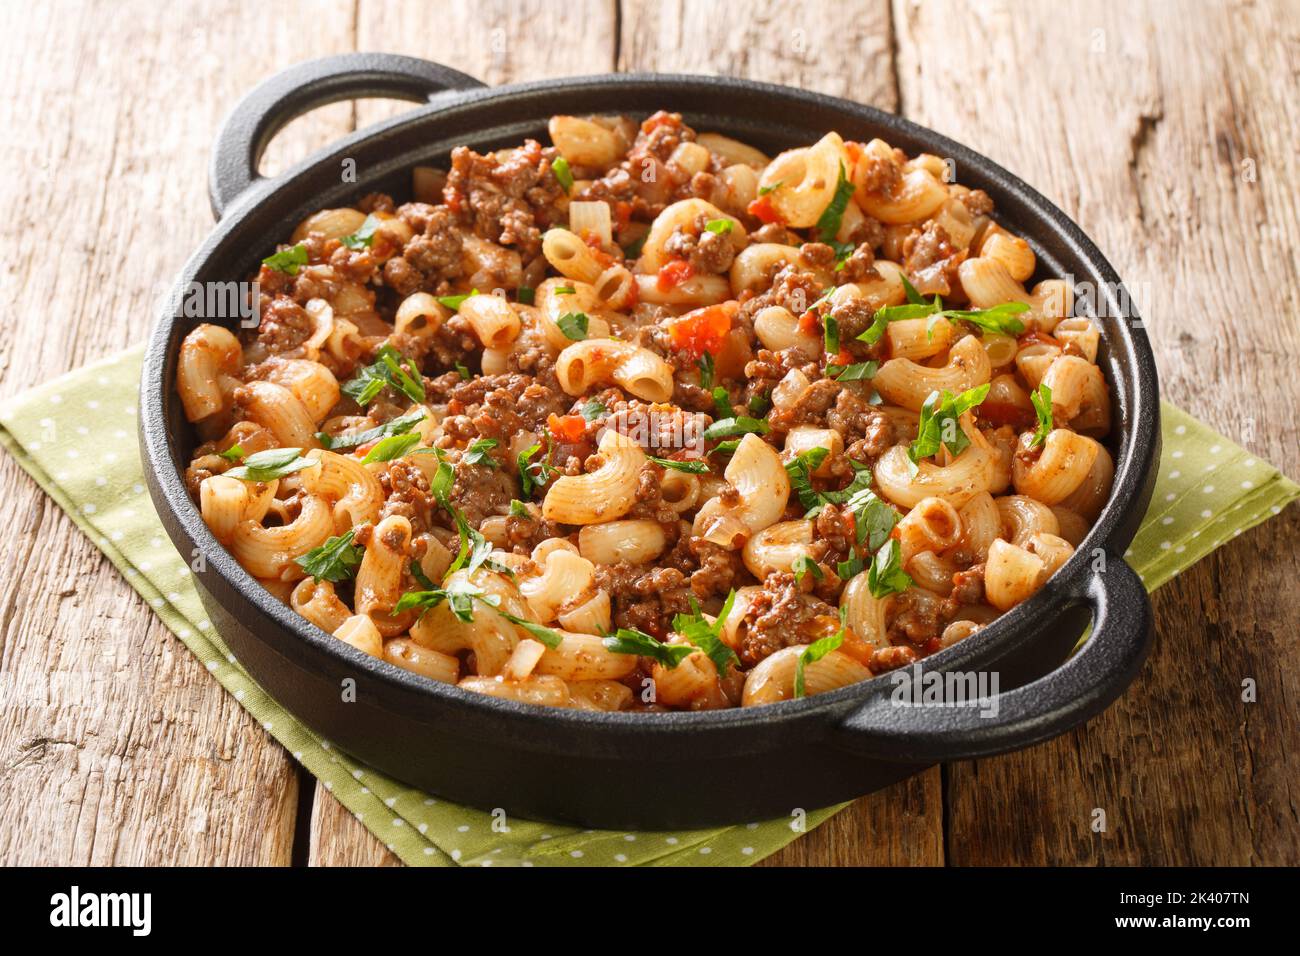 American Hamburger Goulash with Elbow Macaroni closeup in the pan on the wooden table. Horizontal Stock Photo